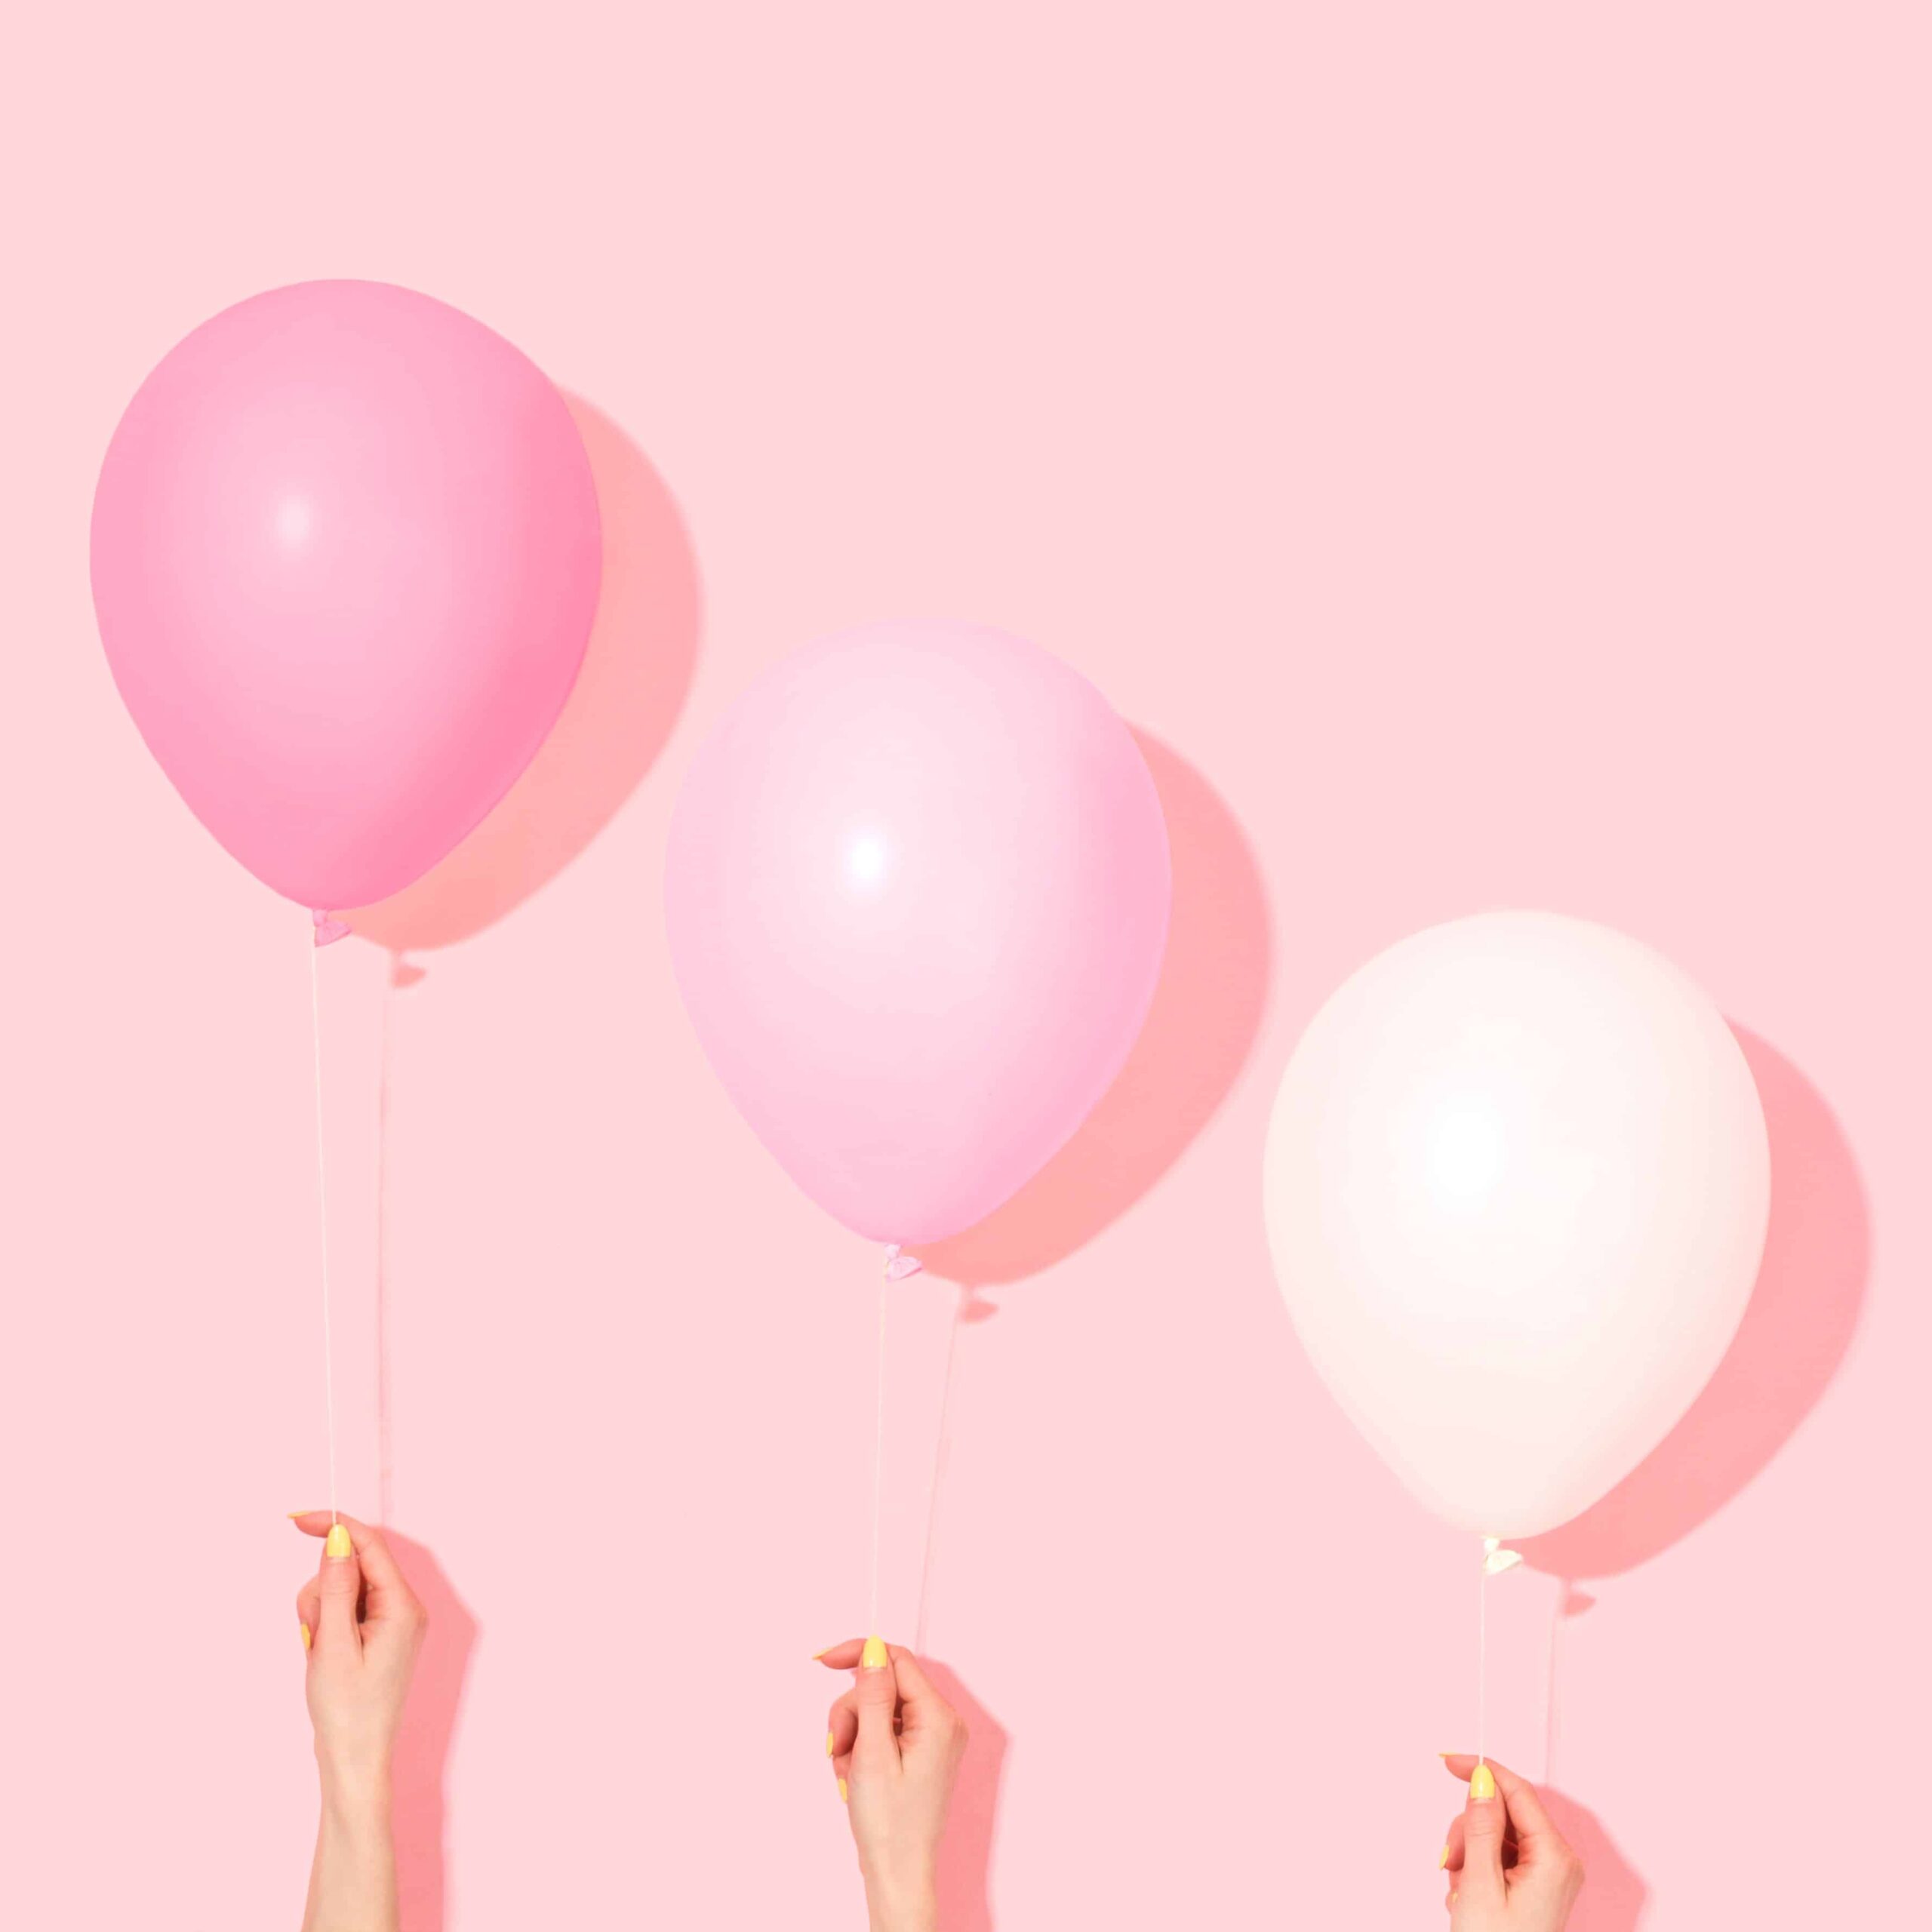 Balloons on a pink background